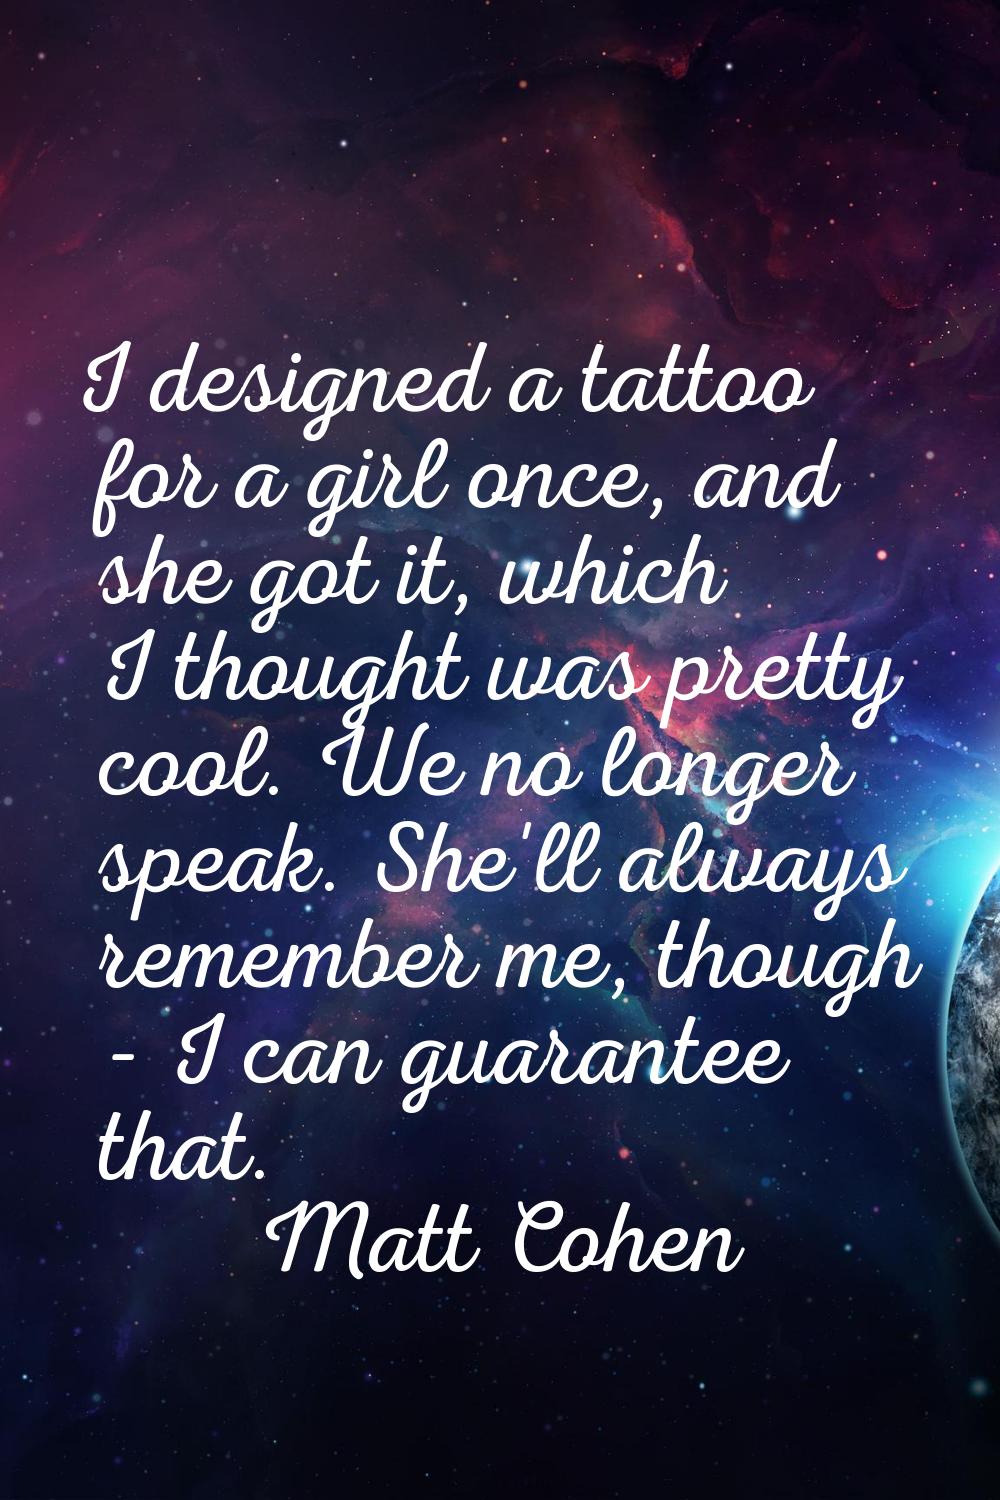 I designed a tattoo for a girl once, and she got it, which I thought was pretty cool. We no longer 